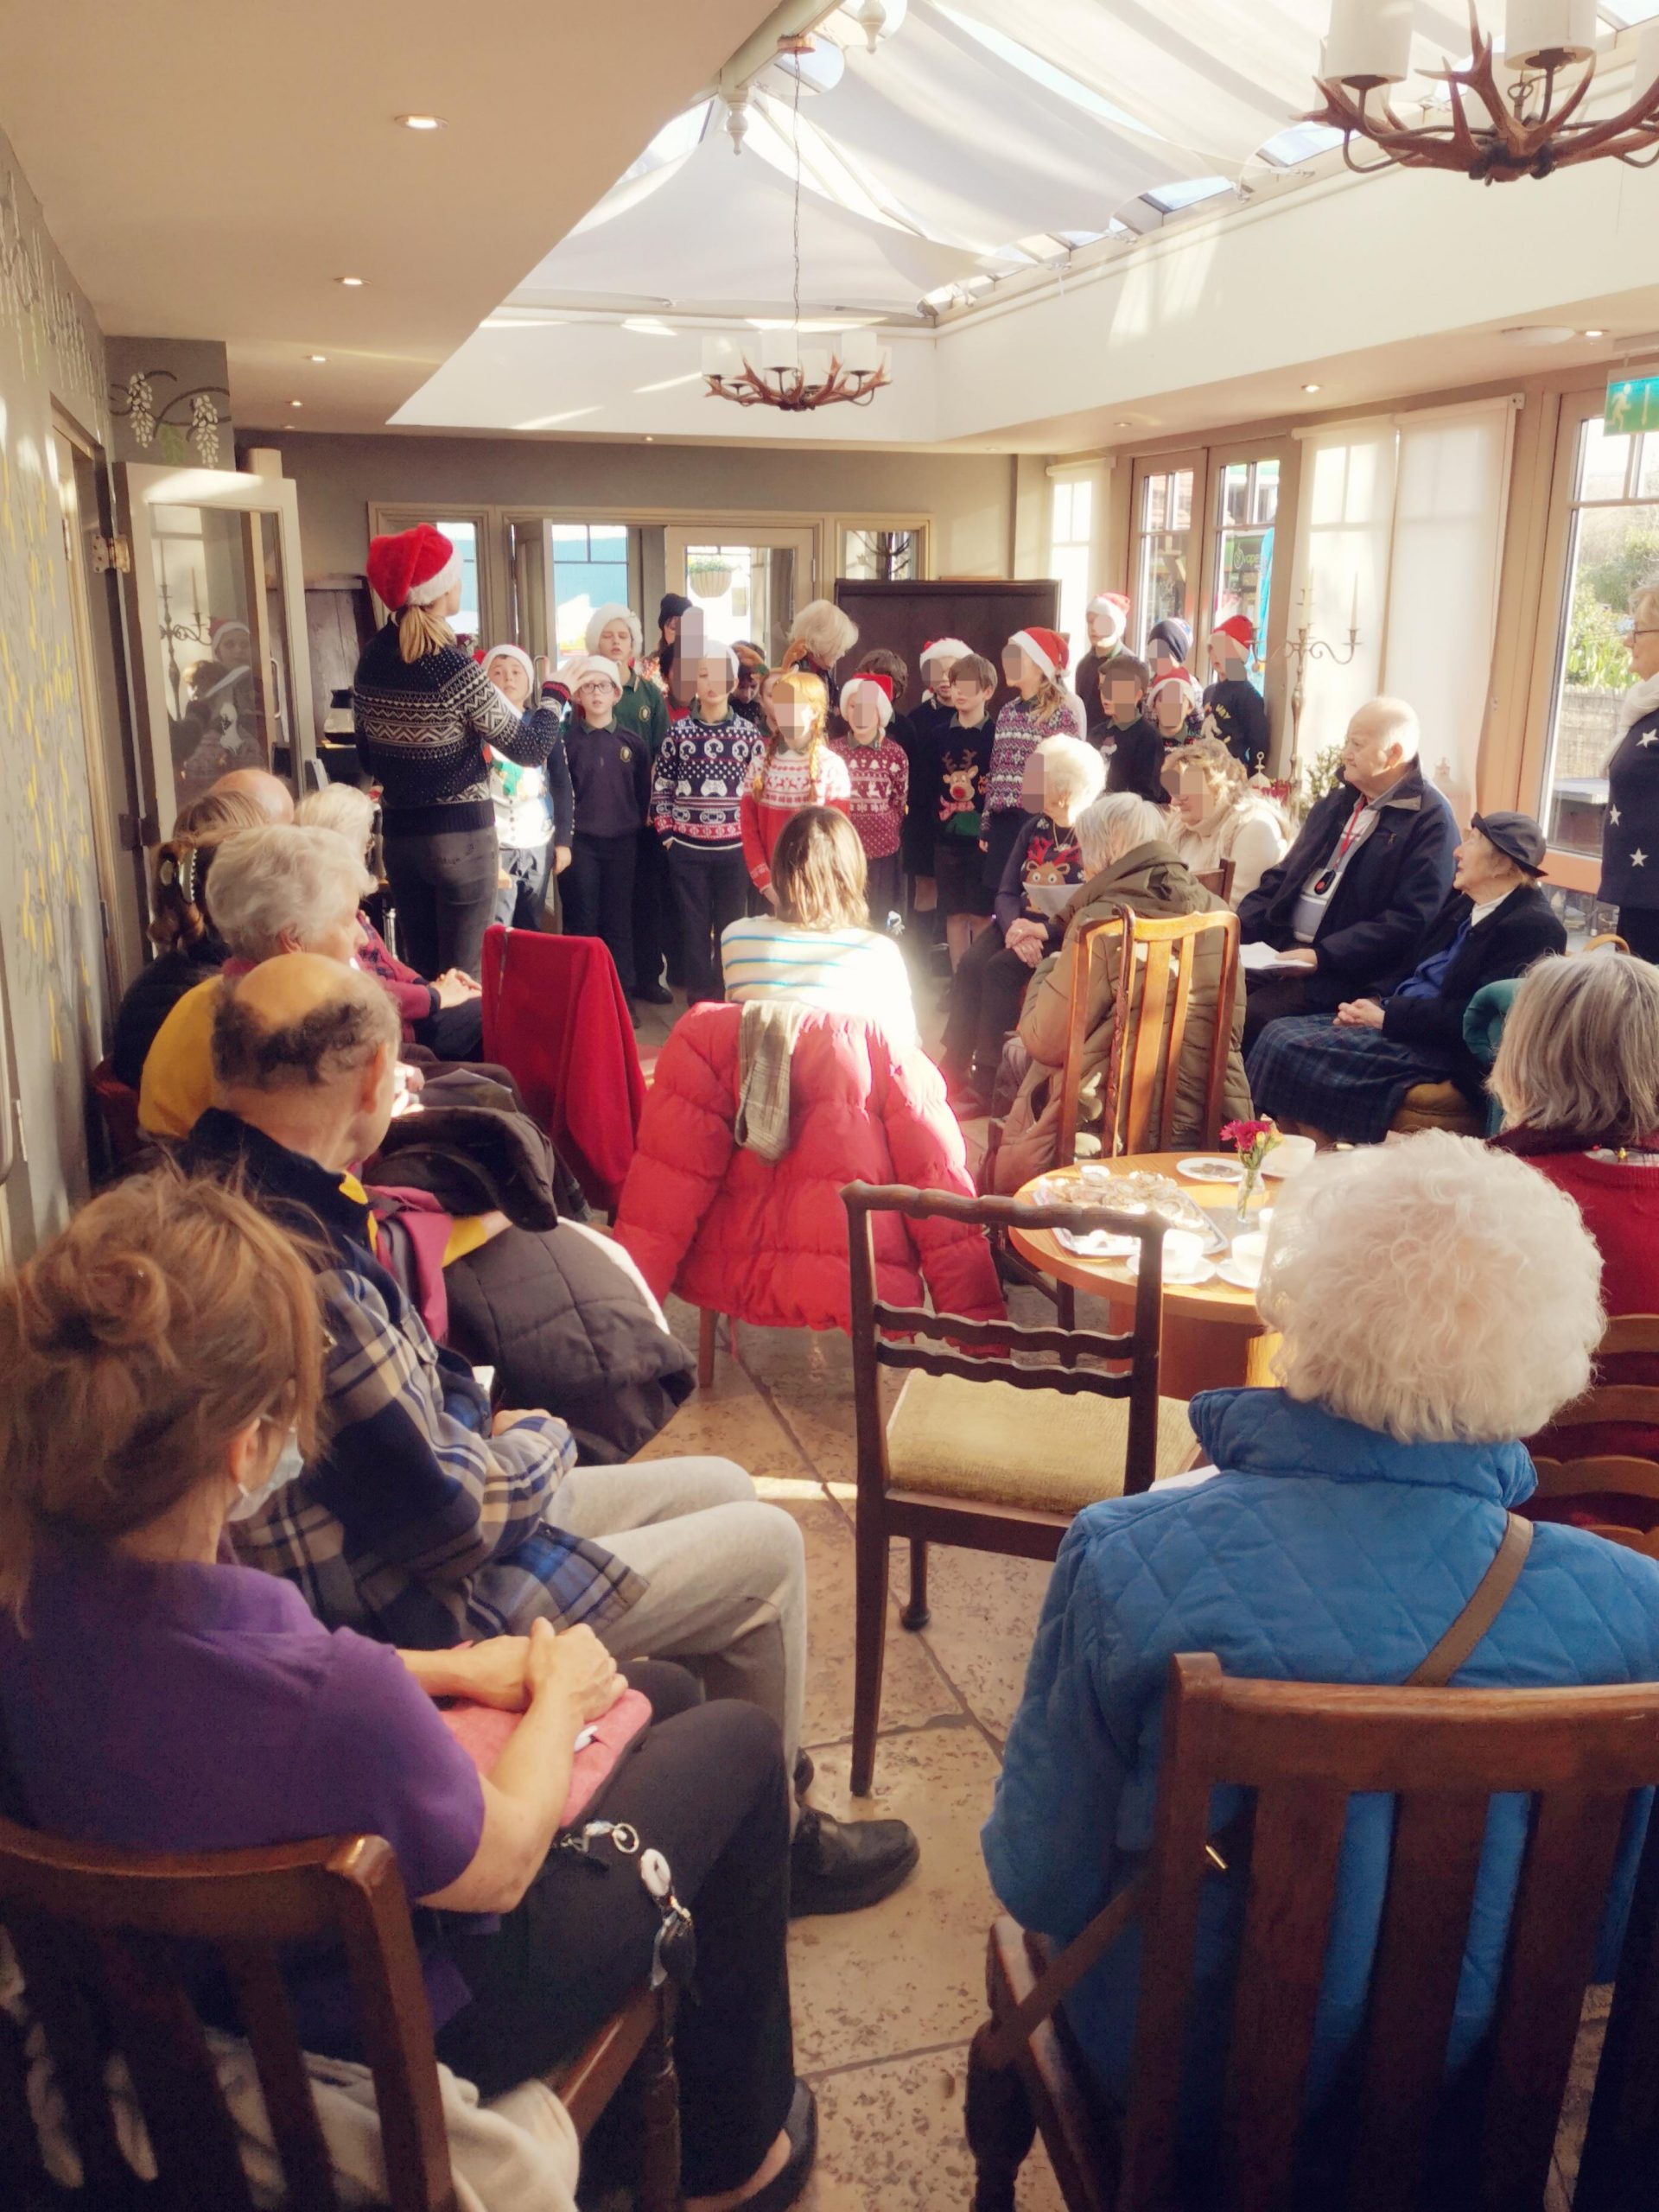 Residents listening to a choir.